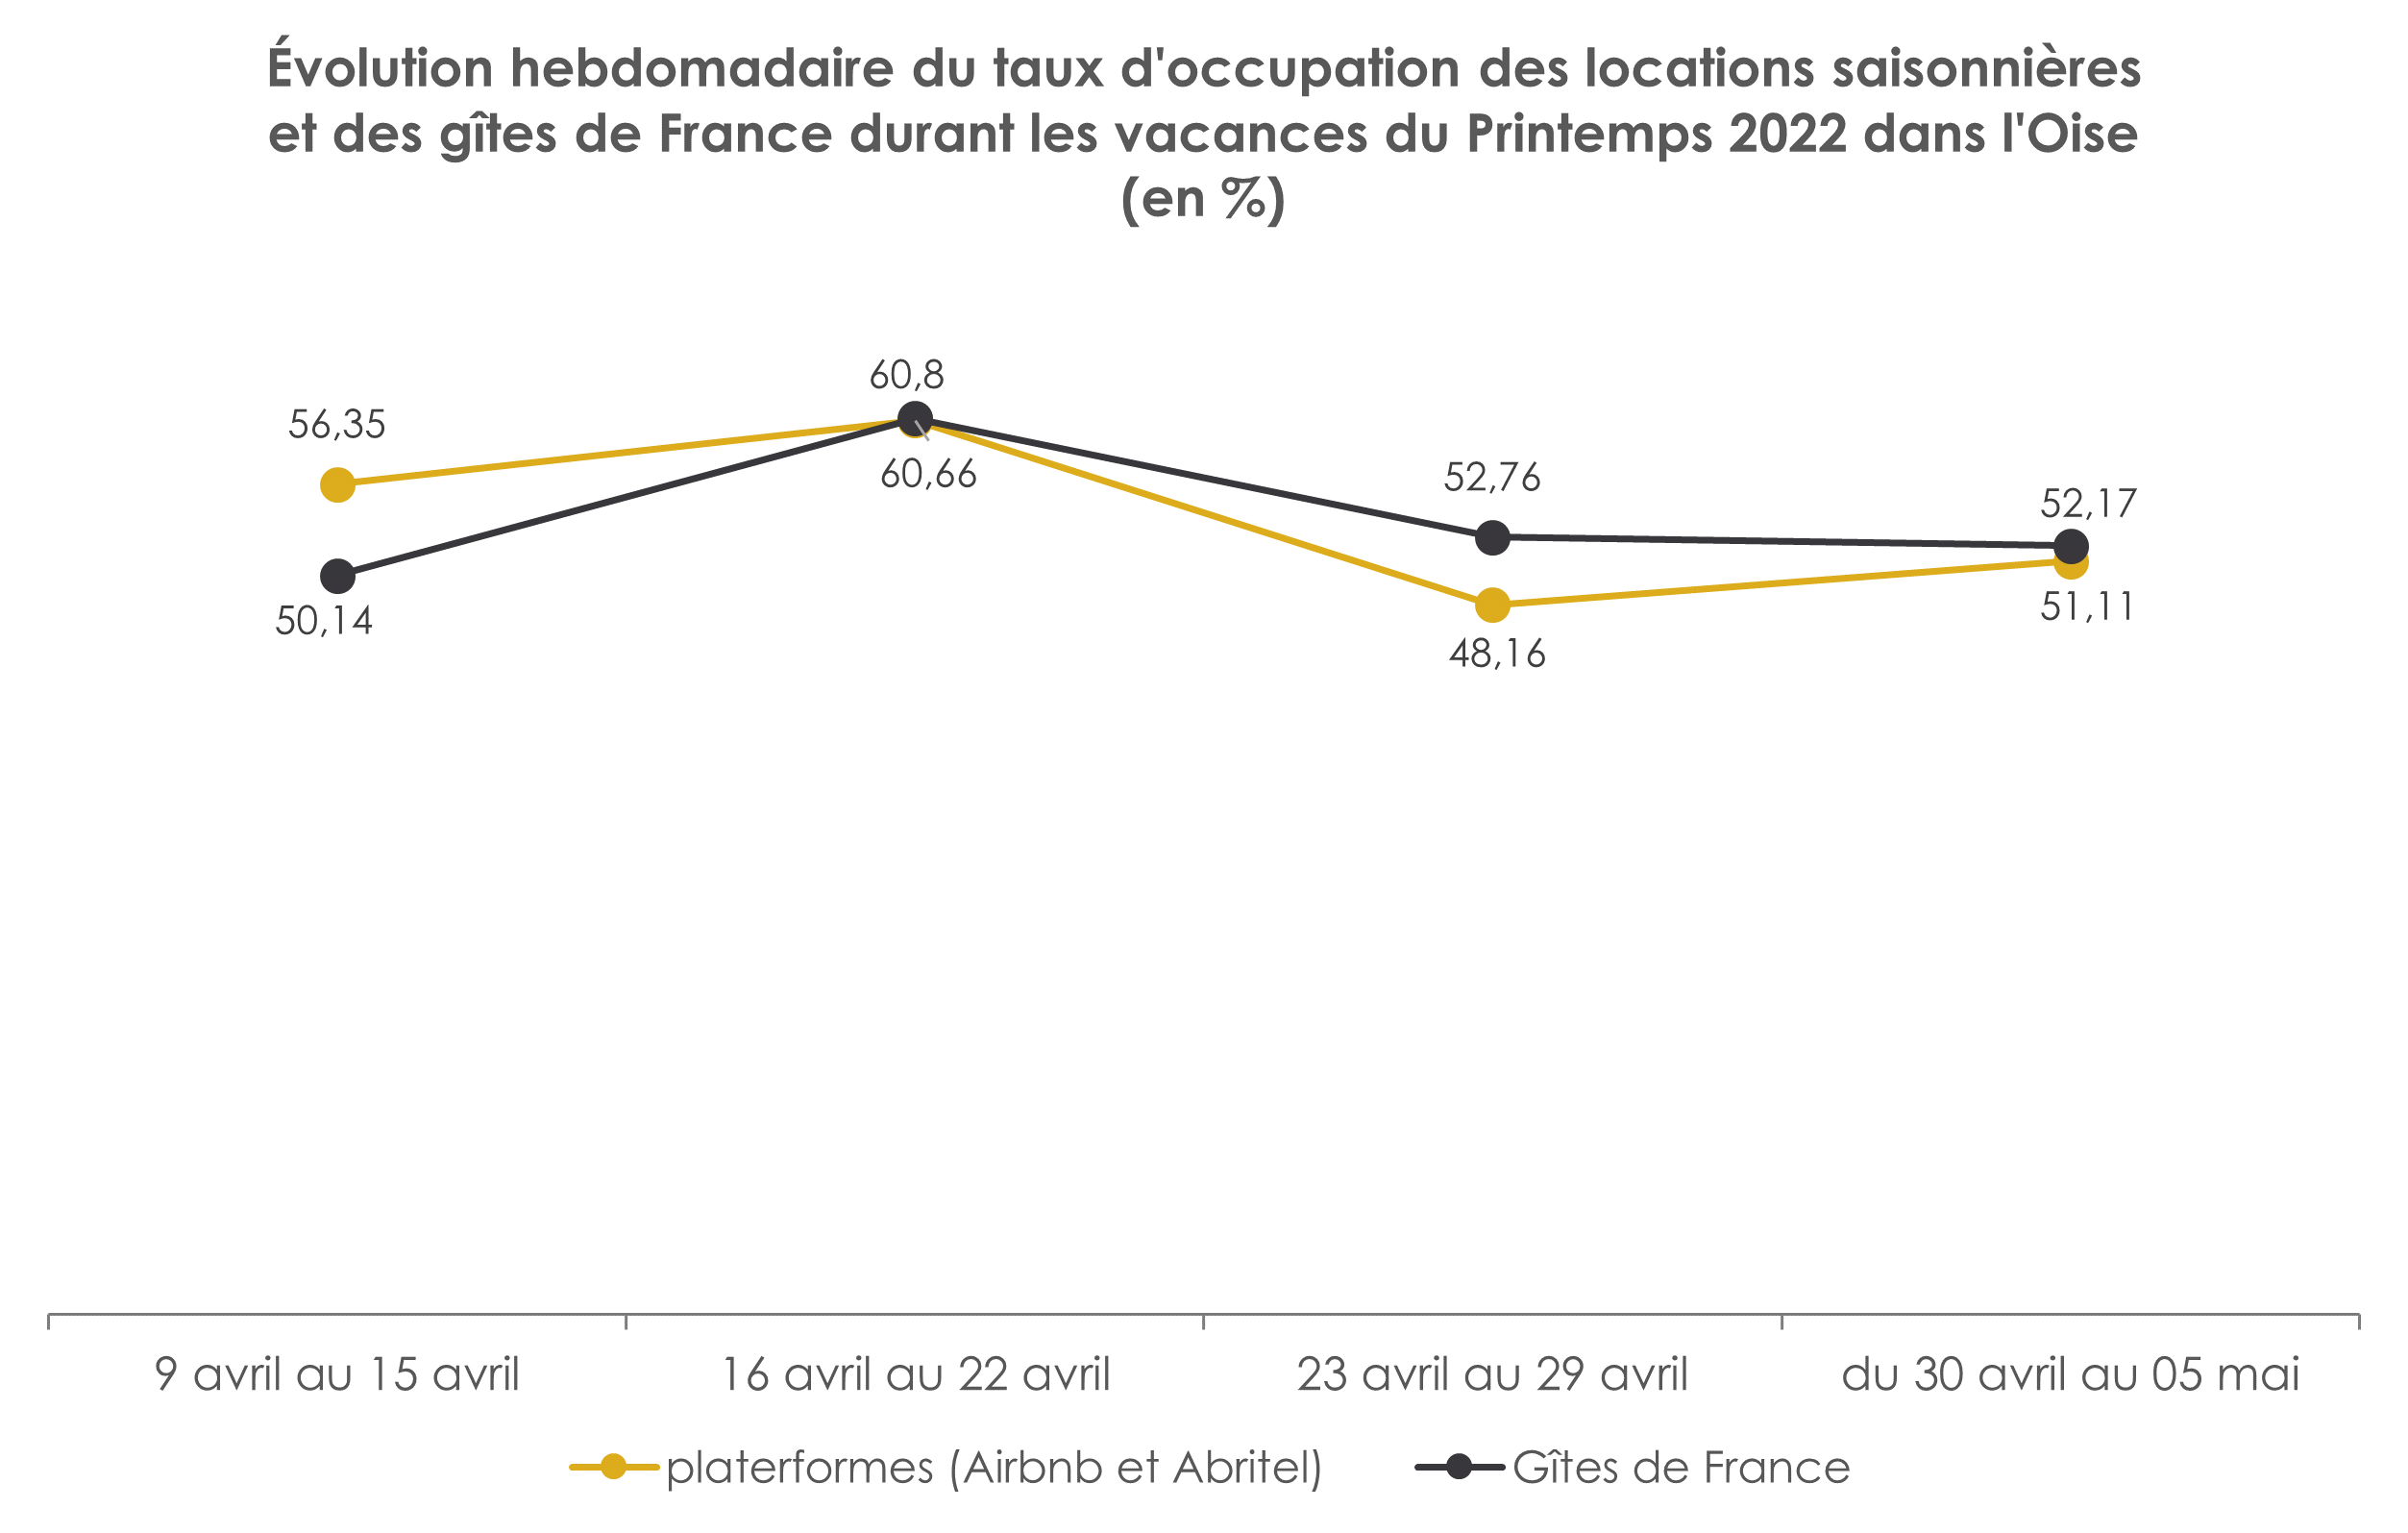 Evolution-taux-occupation-locations-oise-paques-2022